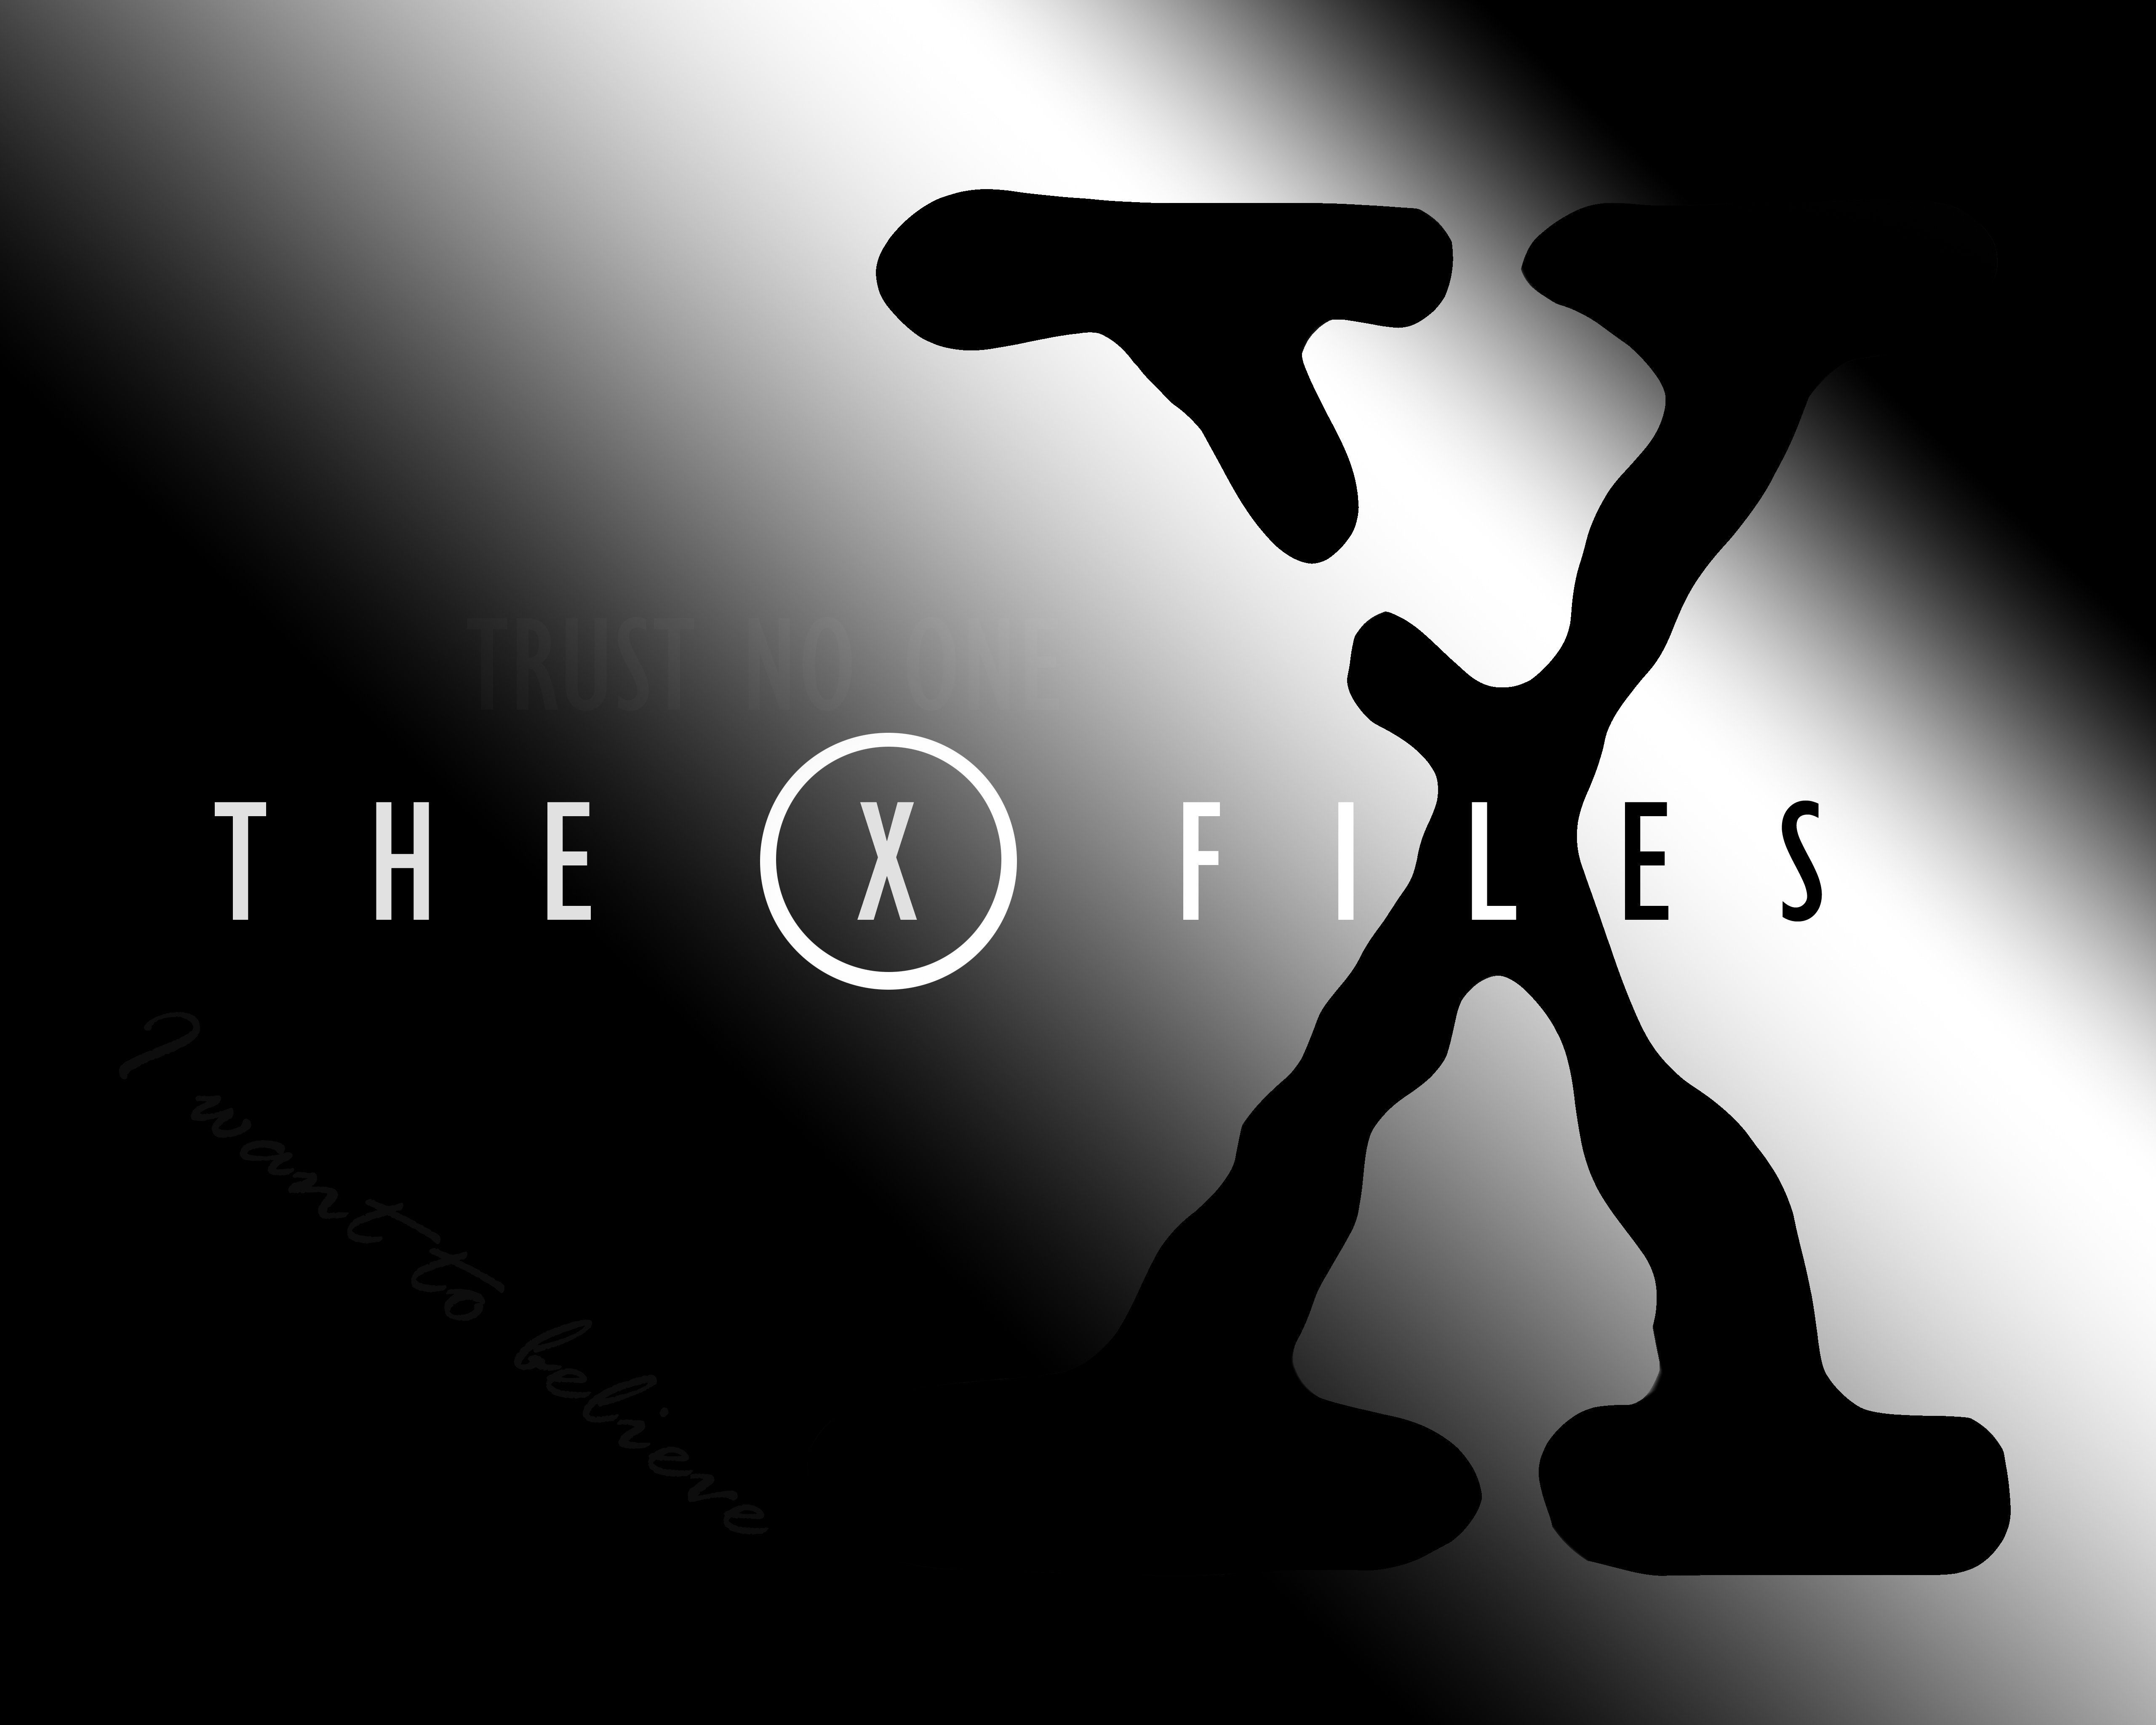 THE X FILES sci fi mystery drama television files series poster